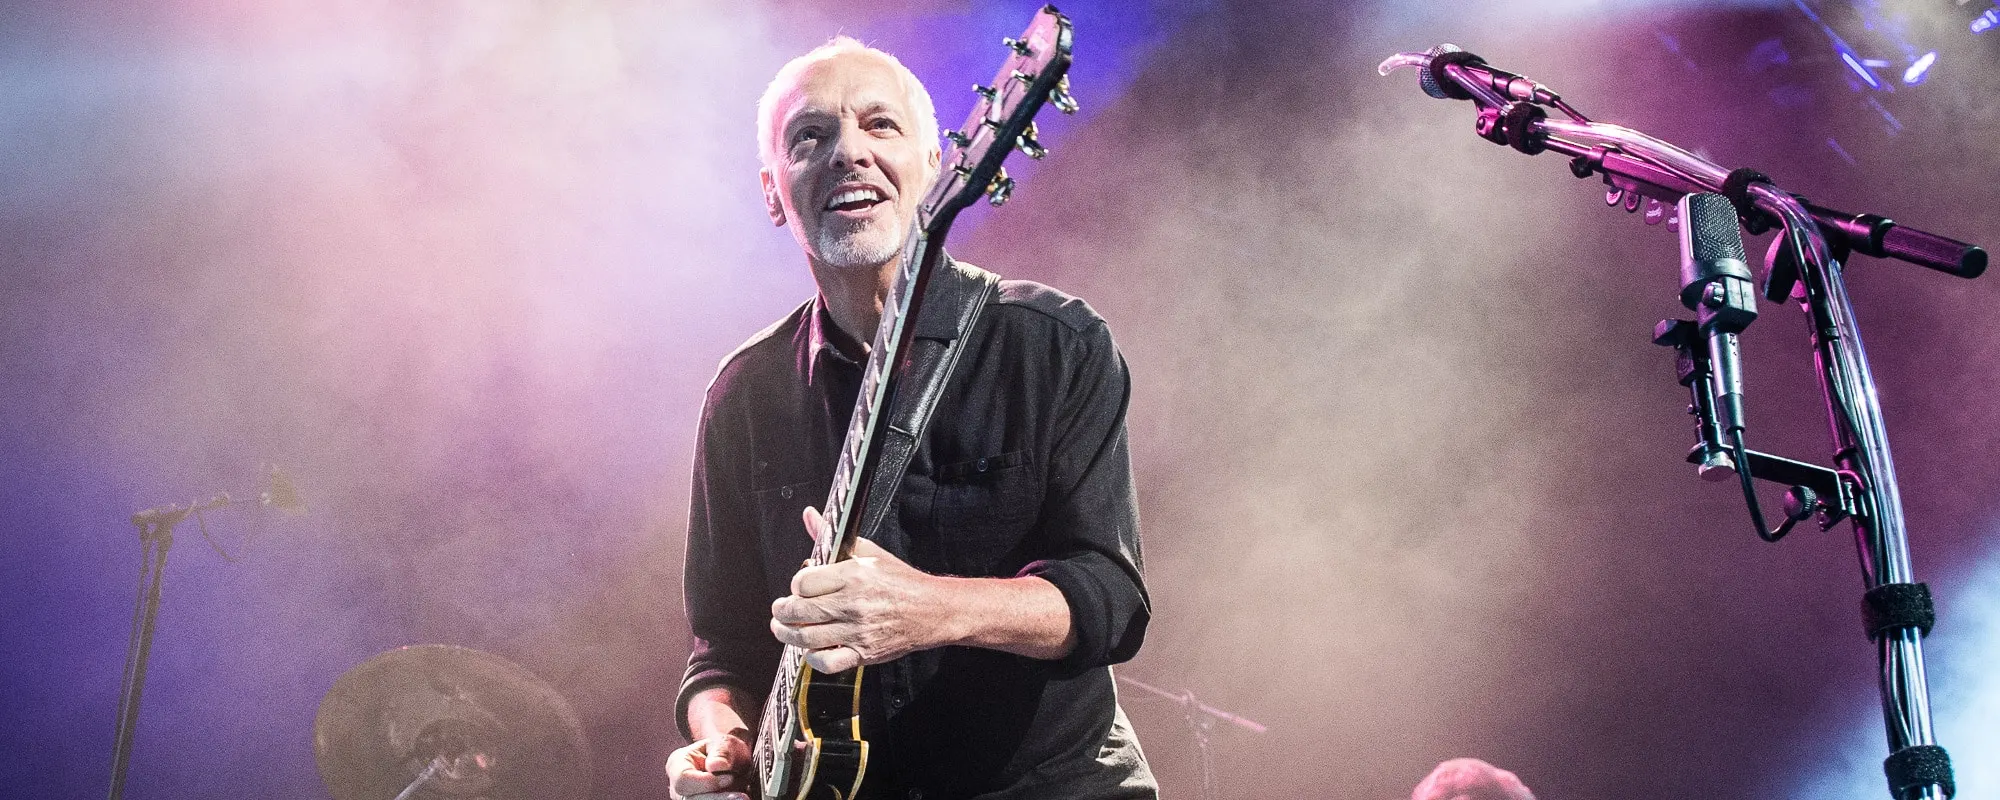 Peter Frampton is Returning to the Road on Never Say Never Tour